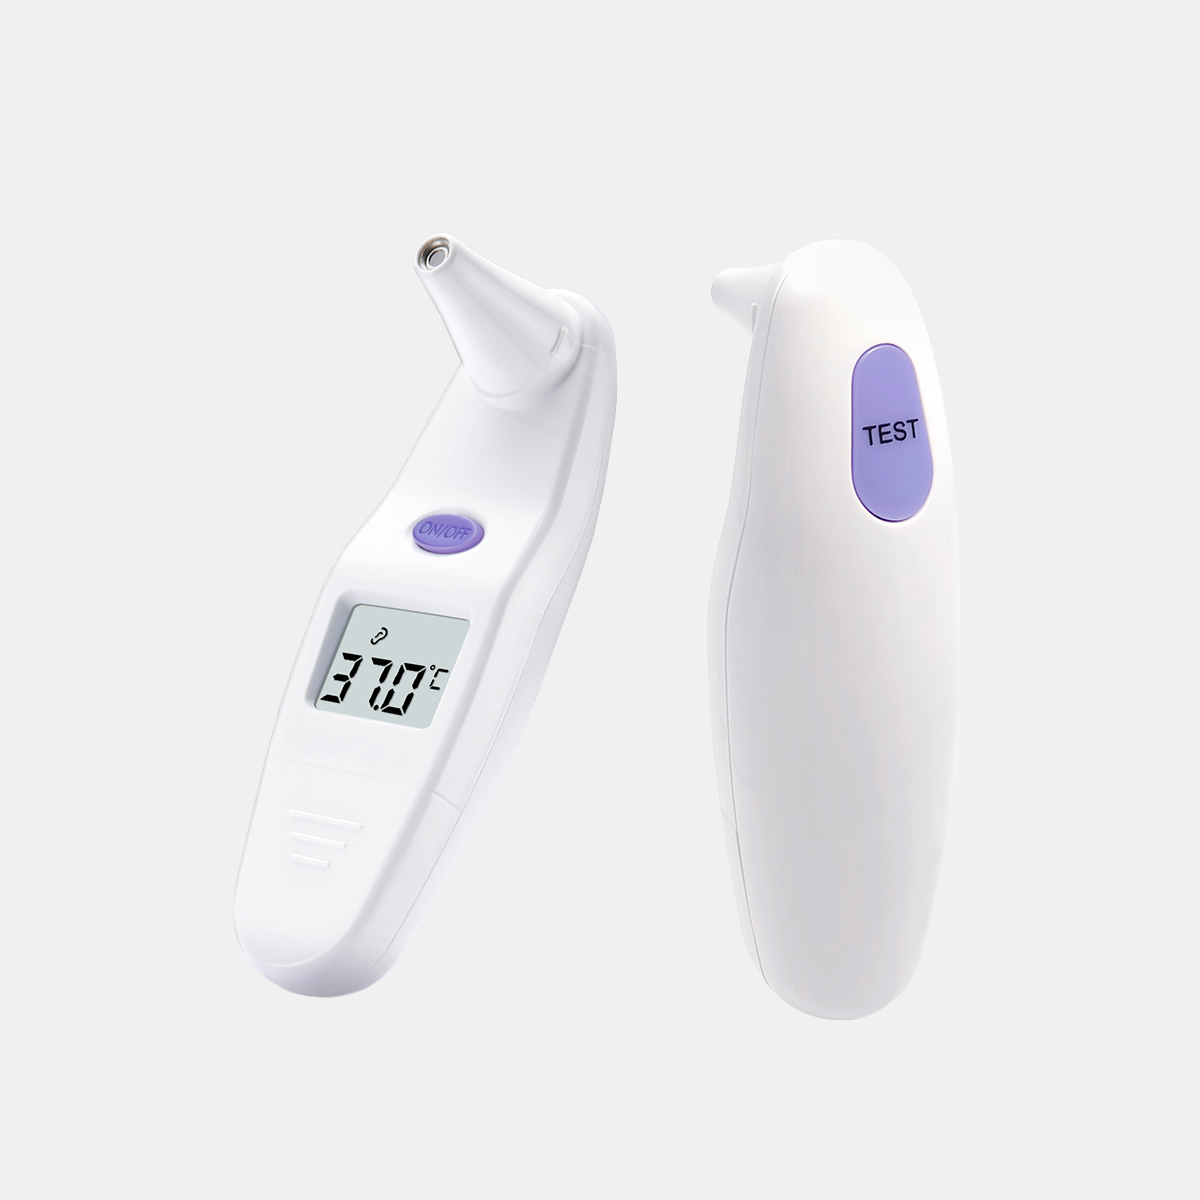 ʻO Sejoy Small Basal Infrared Ear Thermometer for Human Fever CE MDR Approve